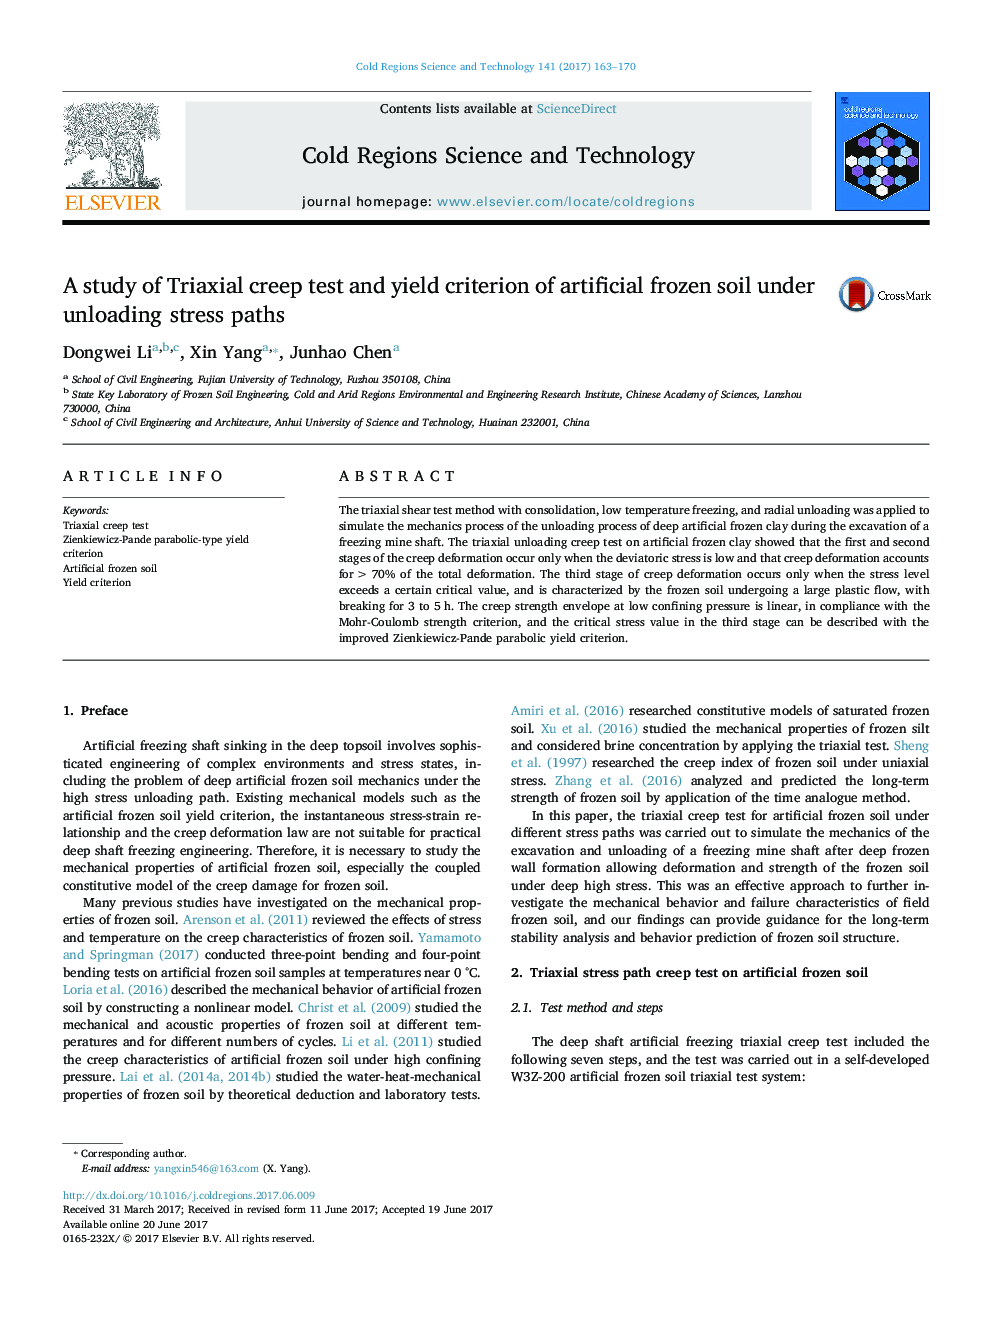 A study of Triaxial creep test and yield criterion of artificial frozen soil under unloading stress paths